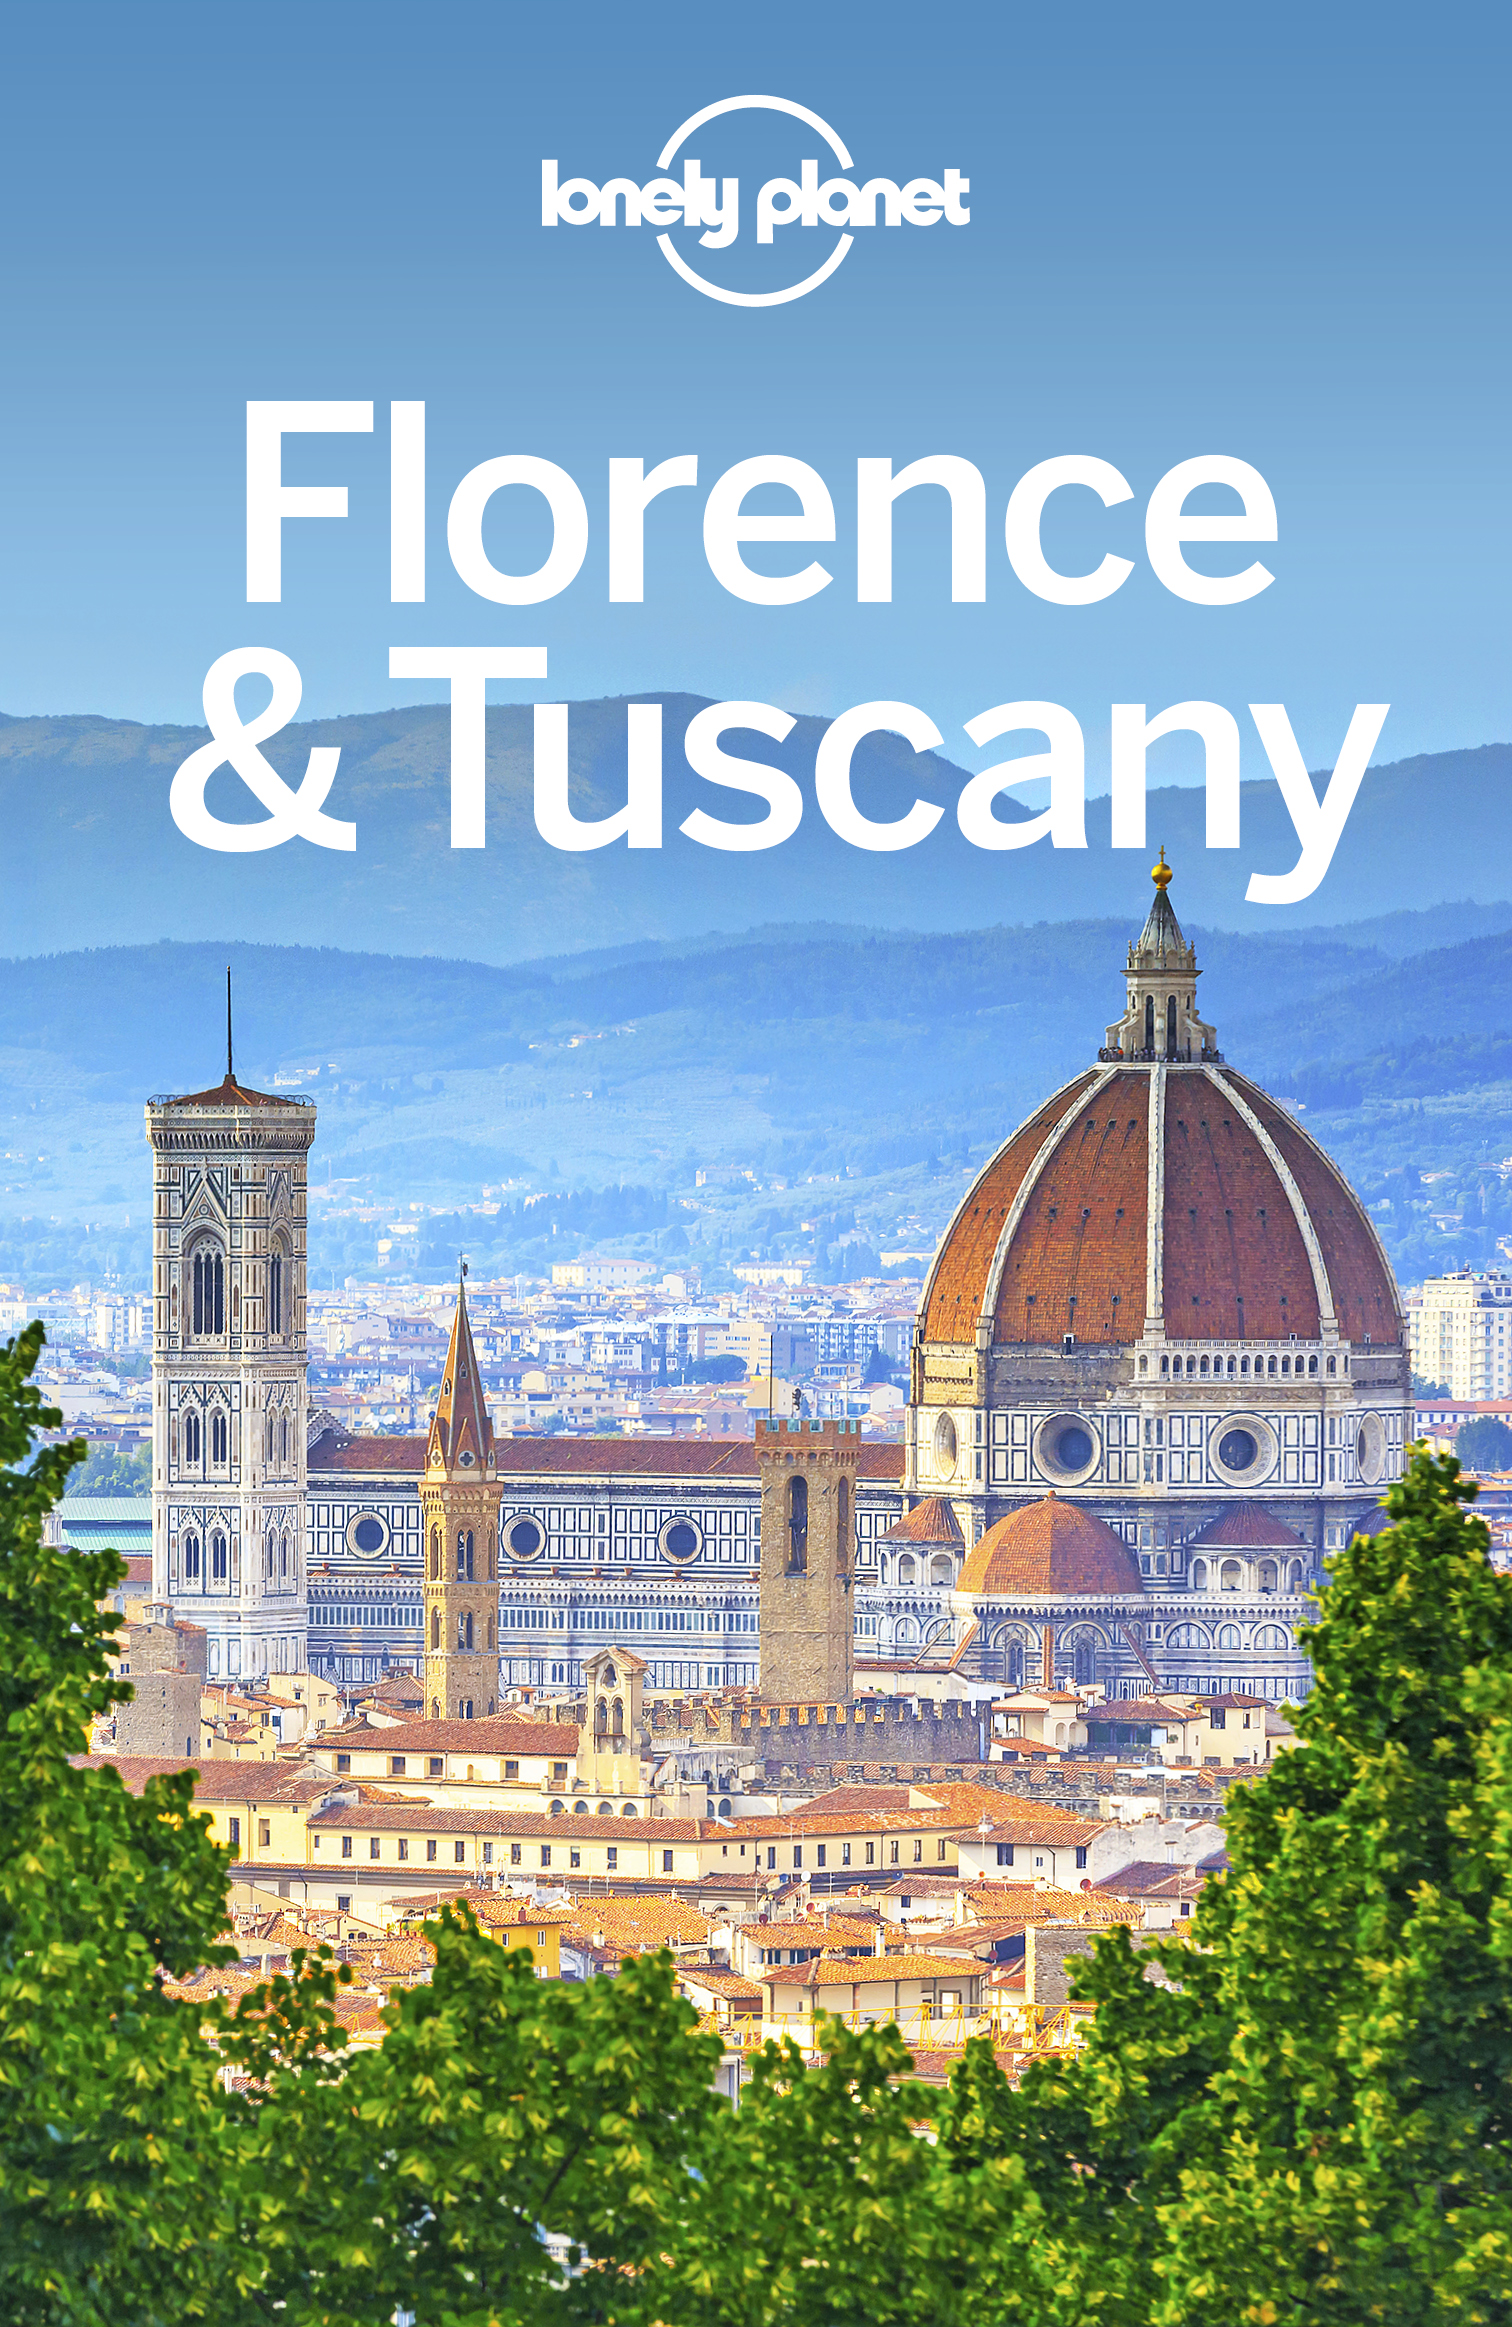 Lonely Planet Florence Tuscany Travel Guide - image 1